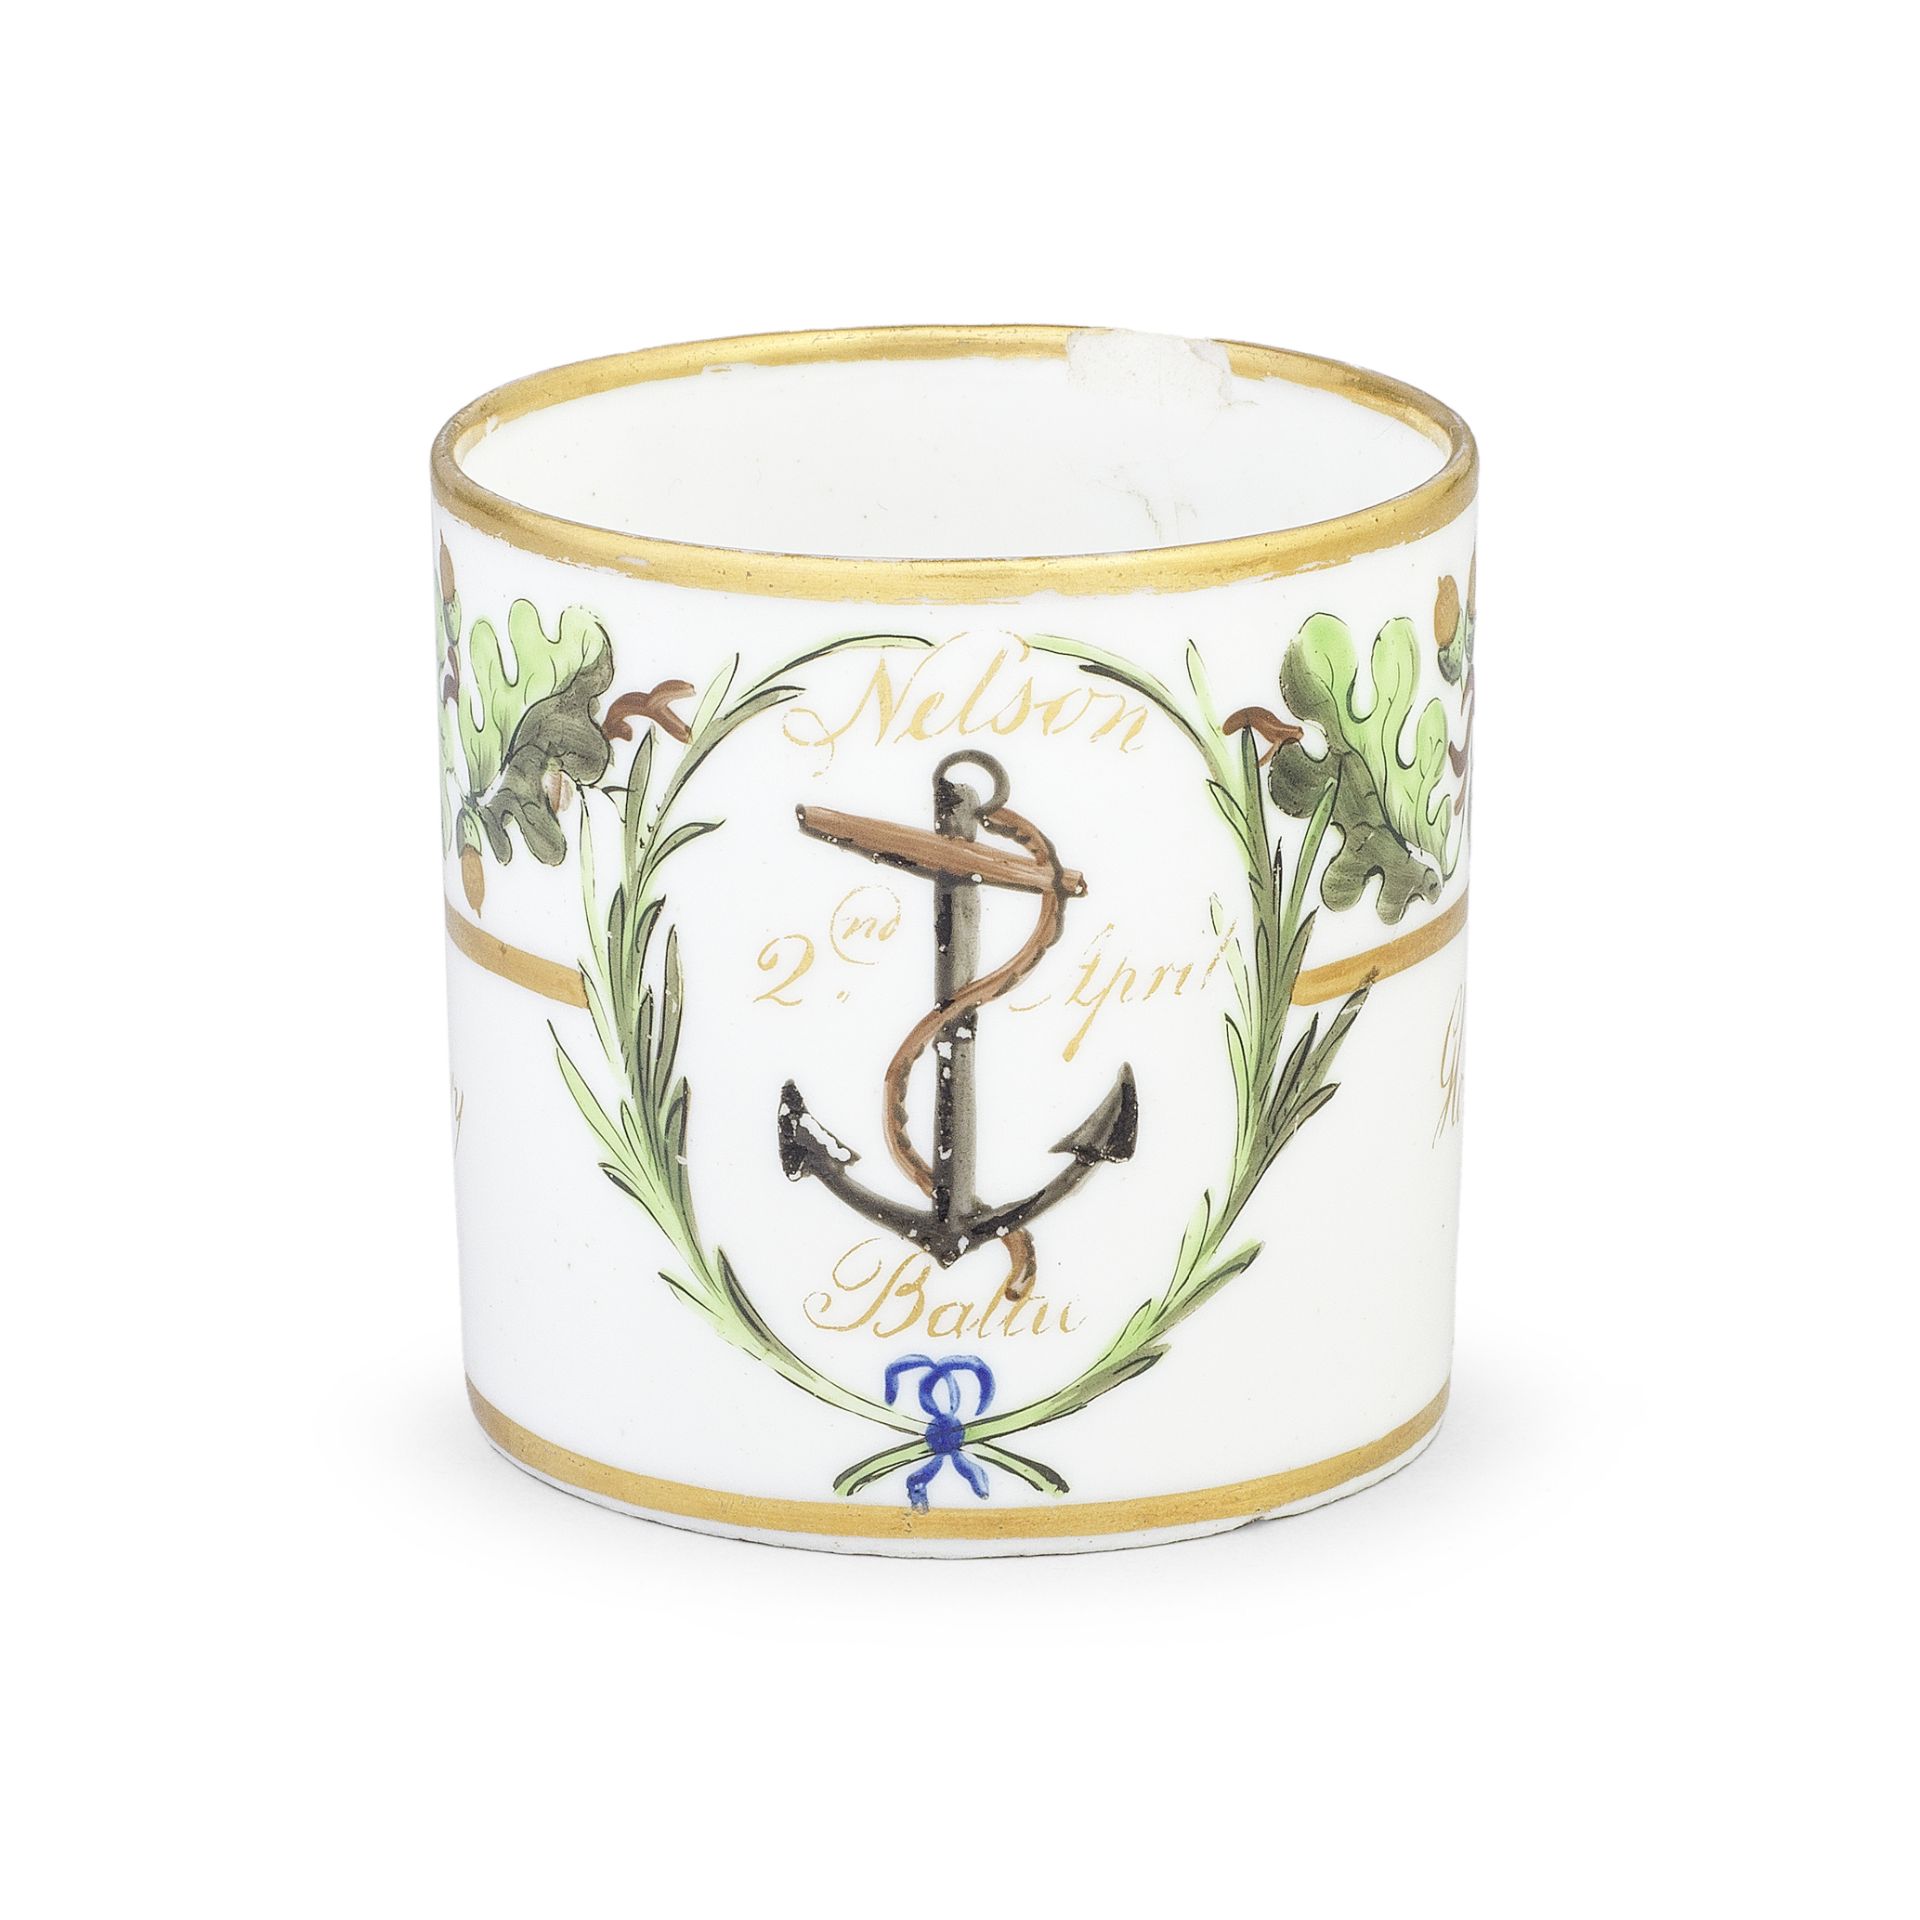 A London-decorated Paris coffee can from the 'Baltic Service', circa 1802